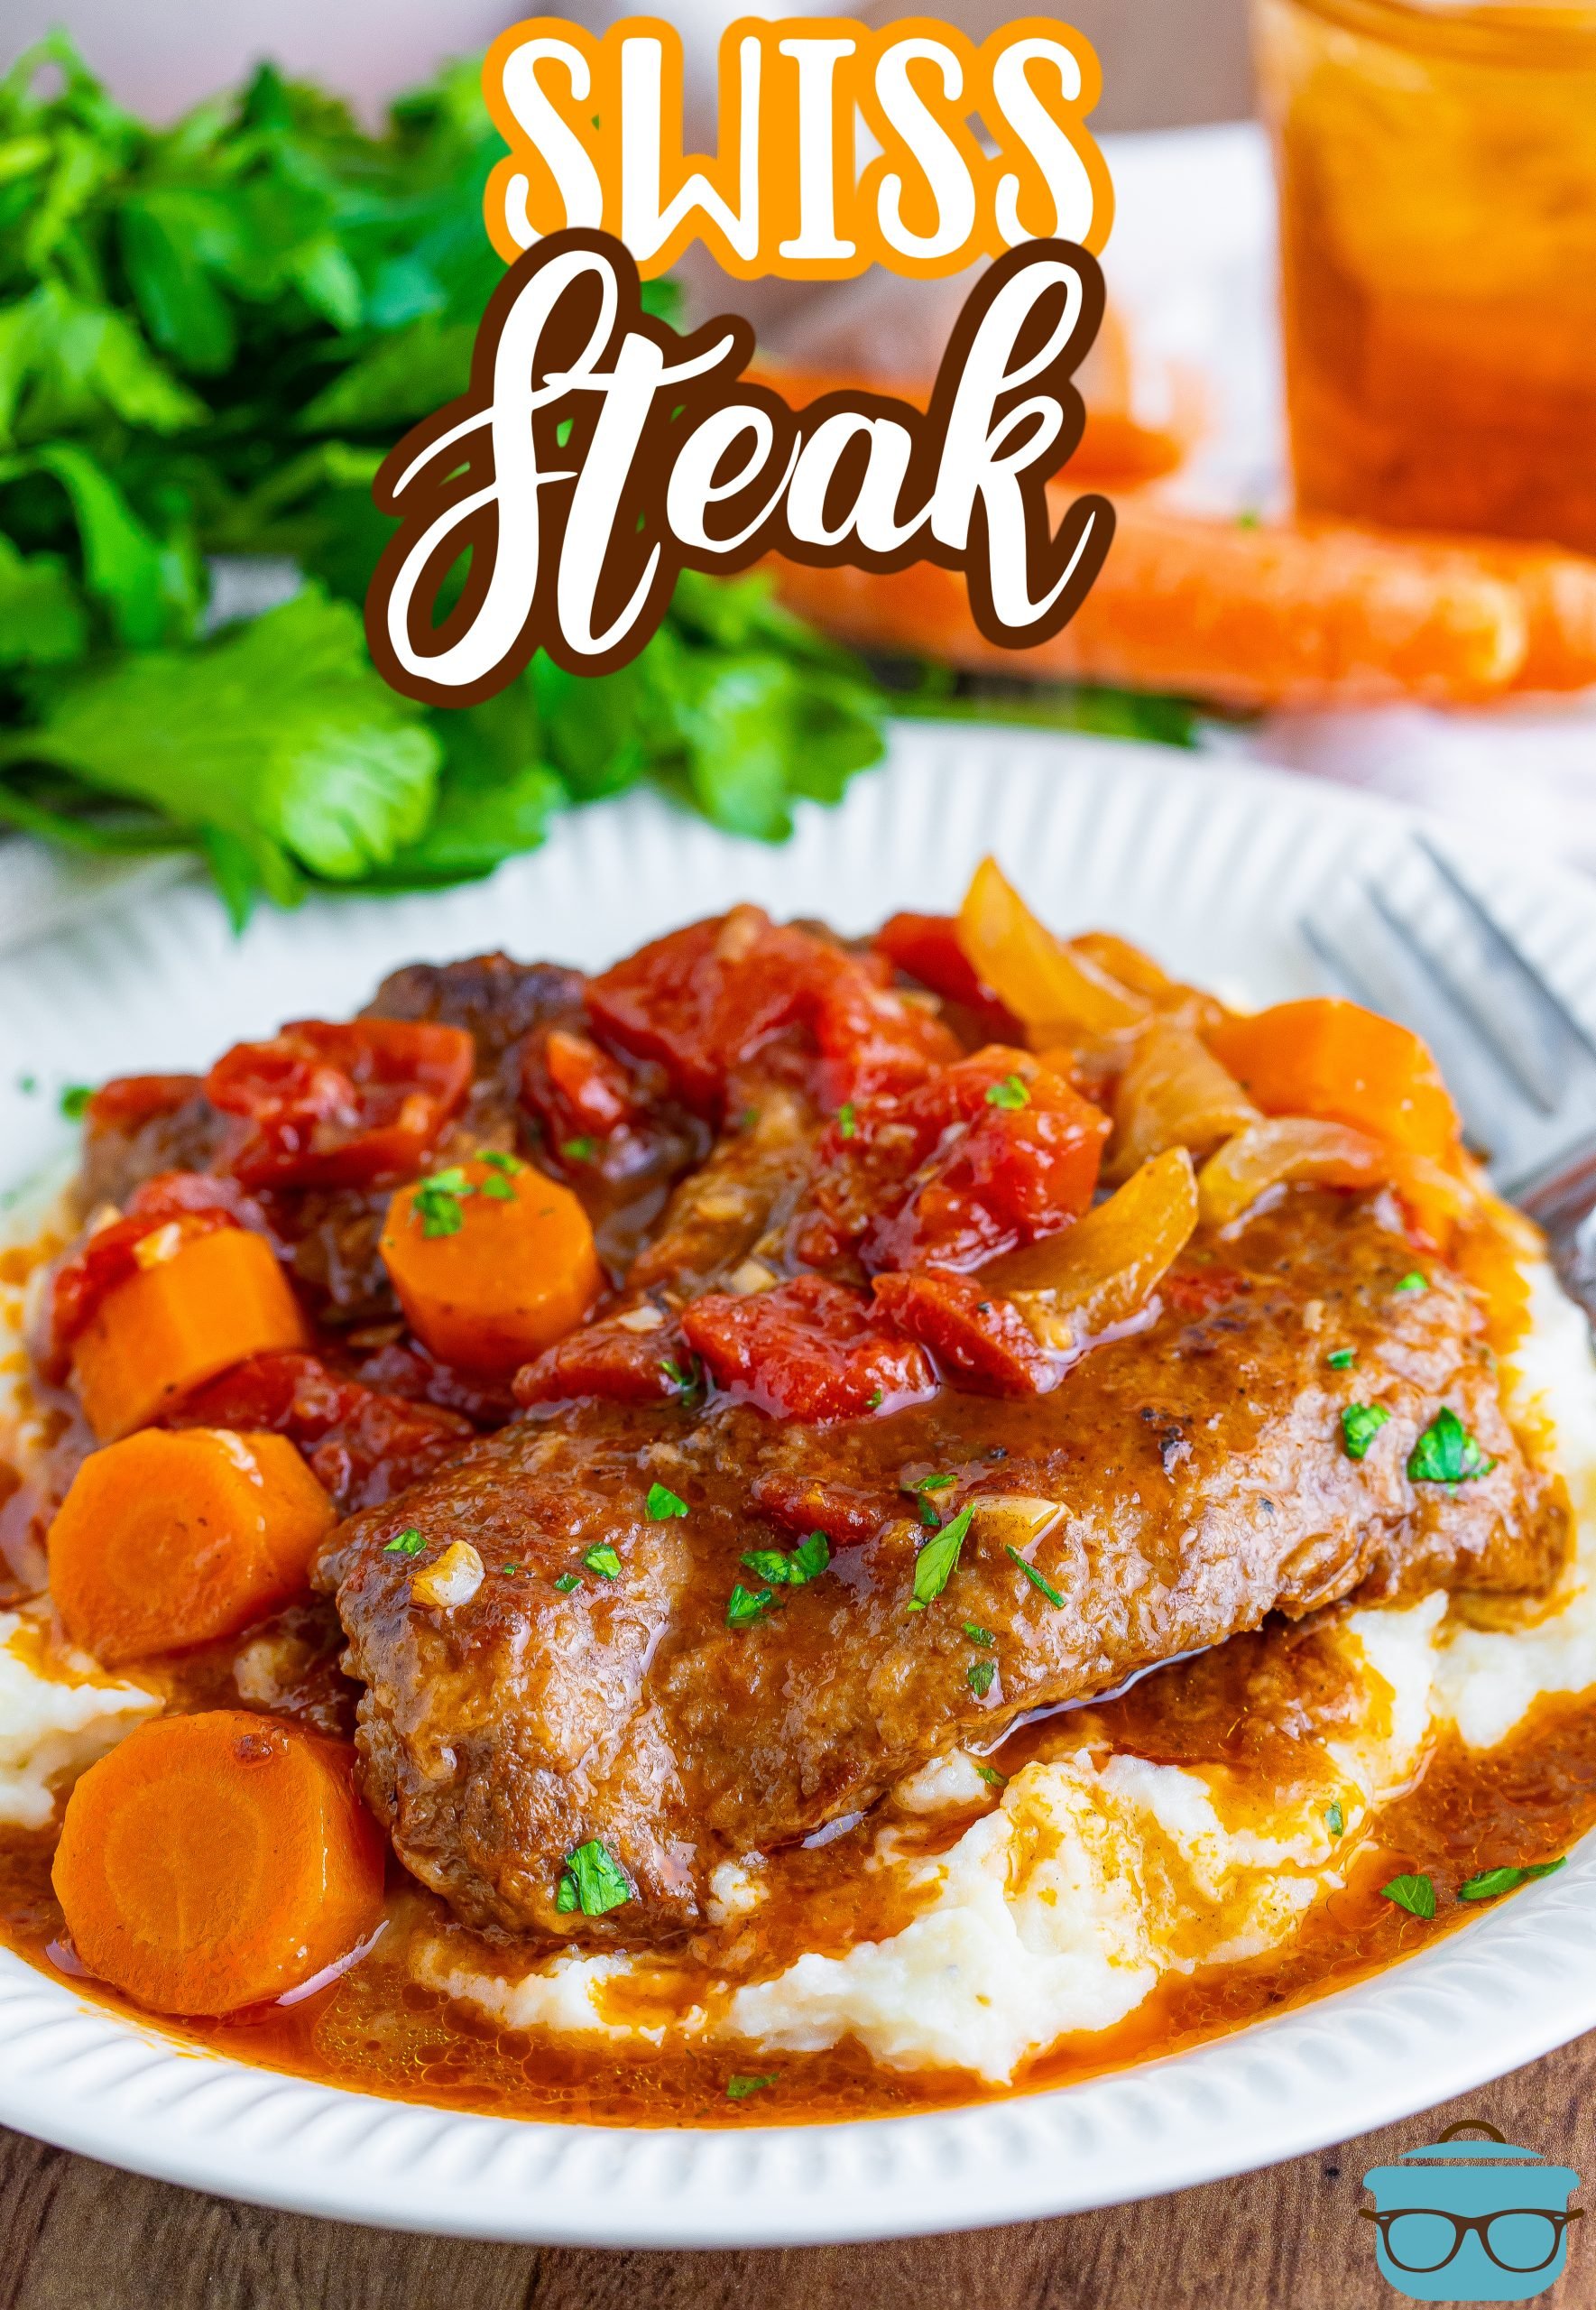 A complete Swiss Steak dinner meal on a plate.